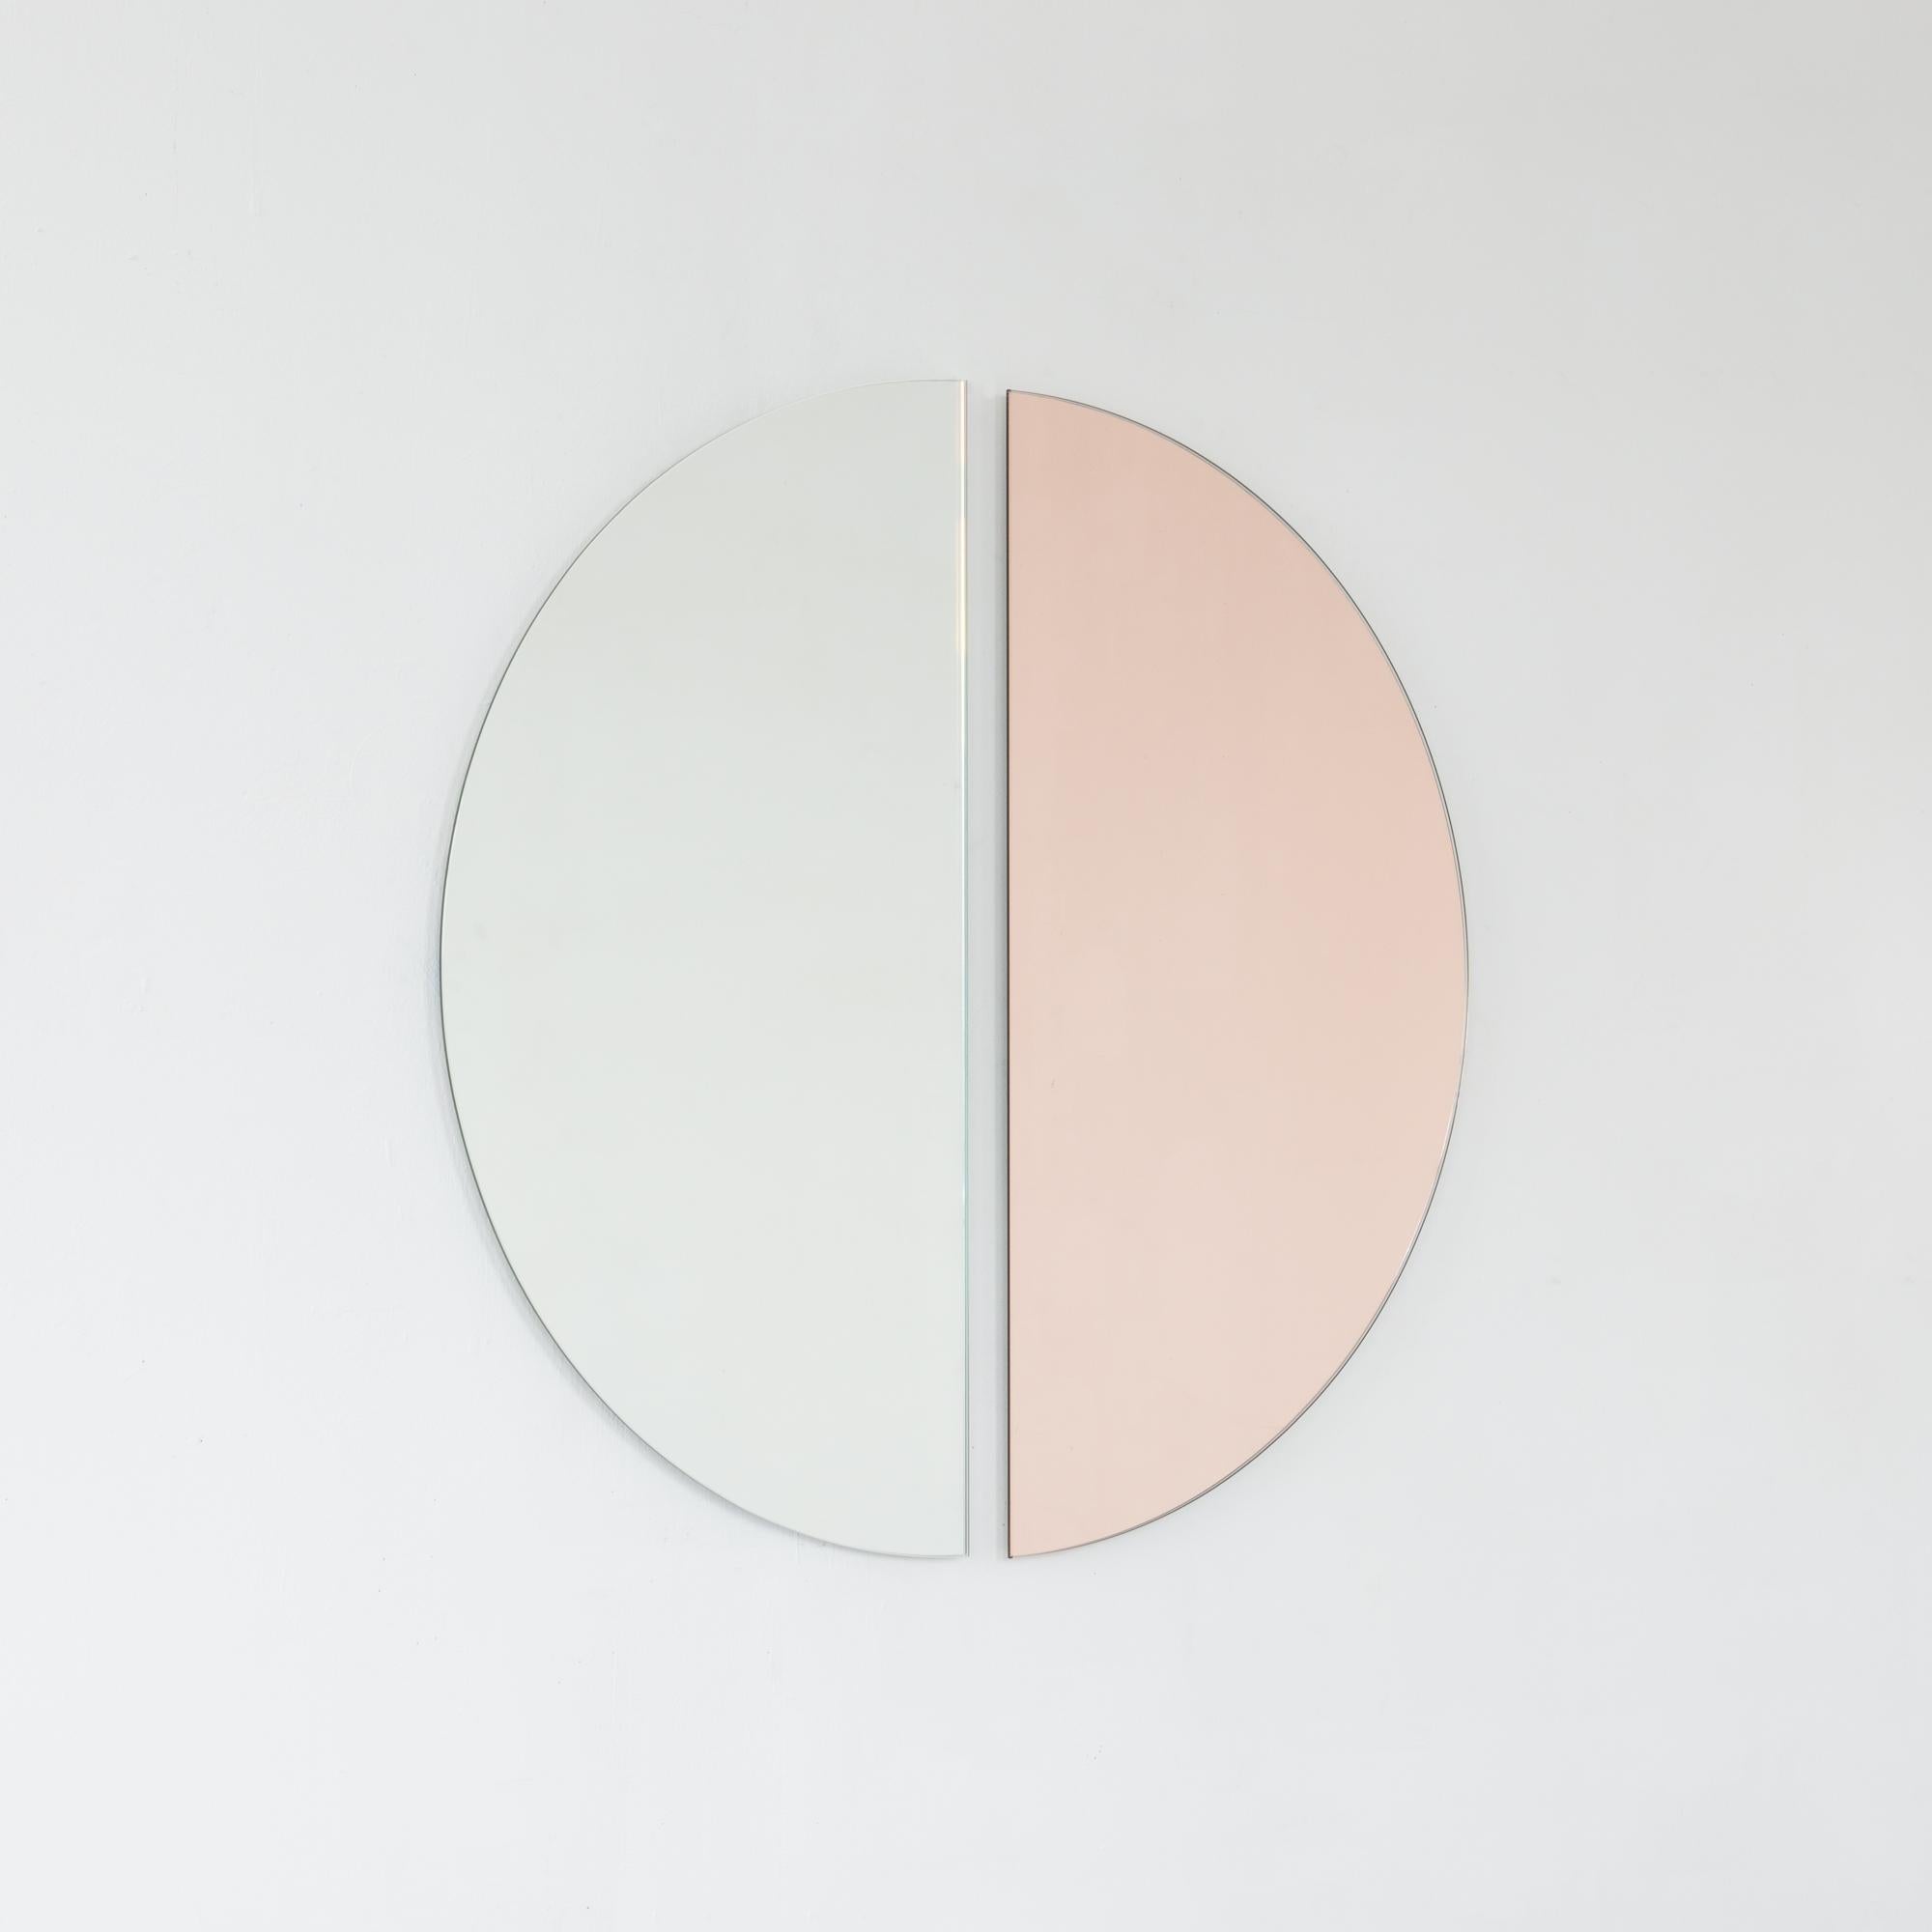 Set of two Luna™ minimalist rose gold (peach) and standard silver half-moon frameless mirrors with a floating effect. Fitted with a quality hanging system for a flexible installation in 4 different directions. Designed and made in London, UK. 

Our